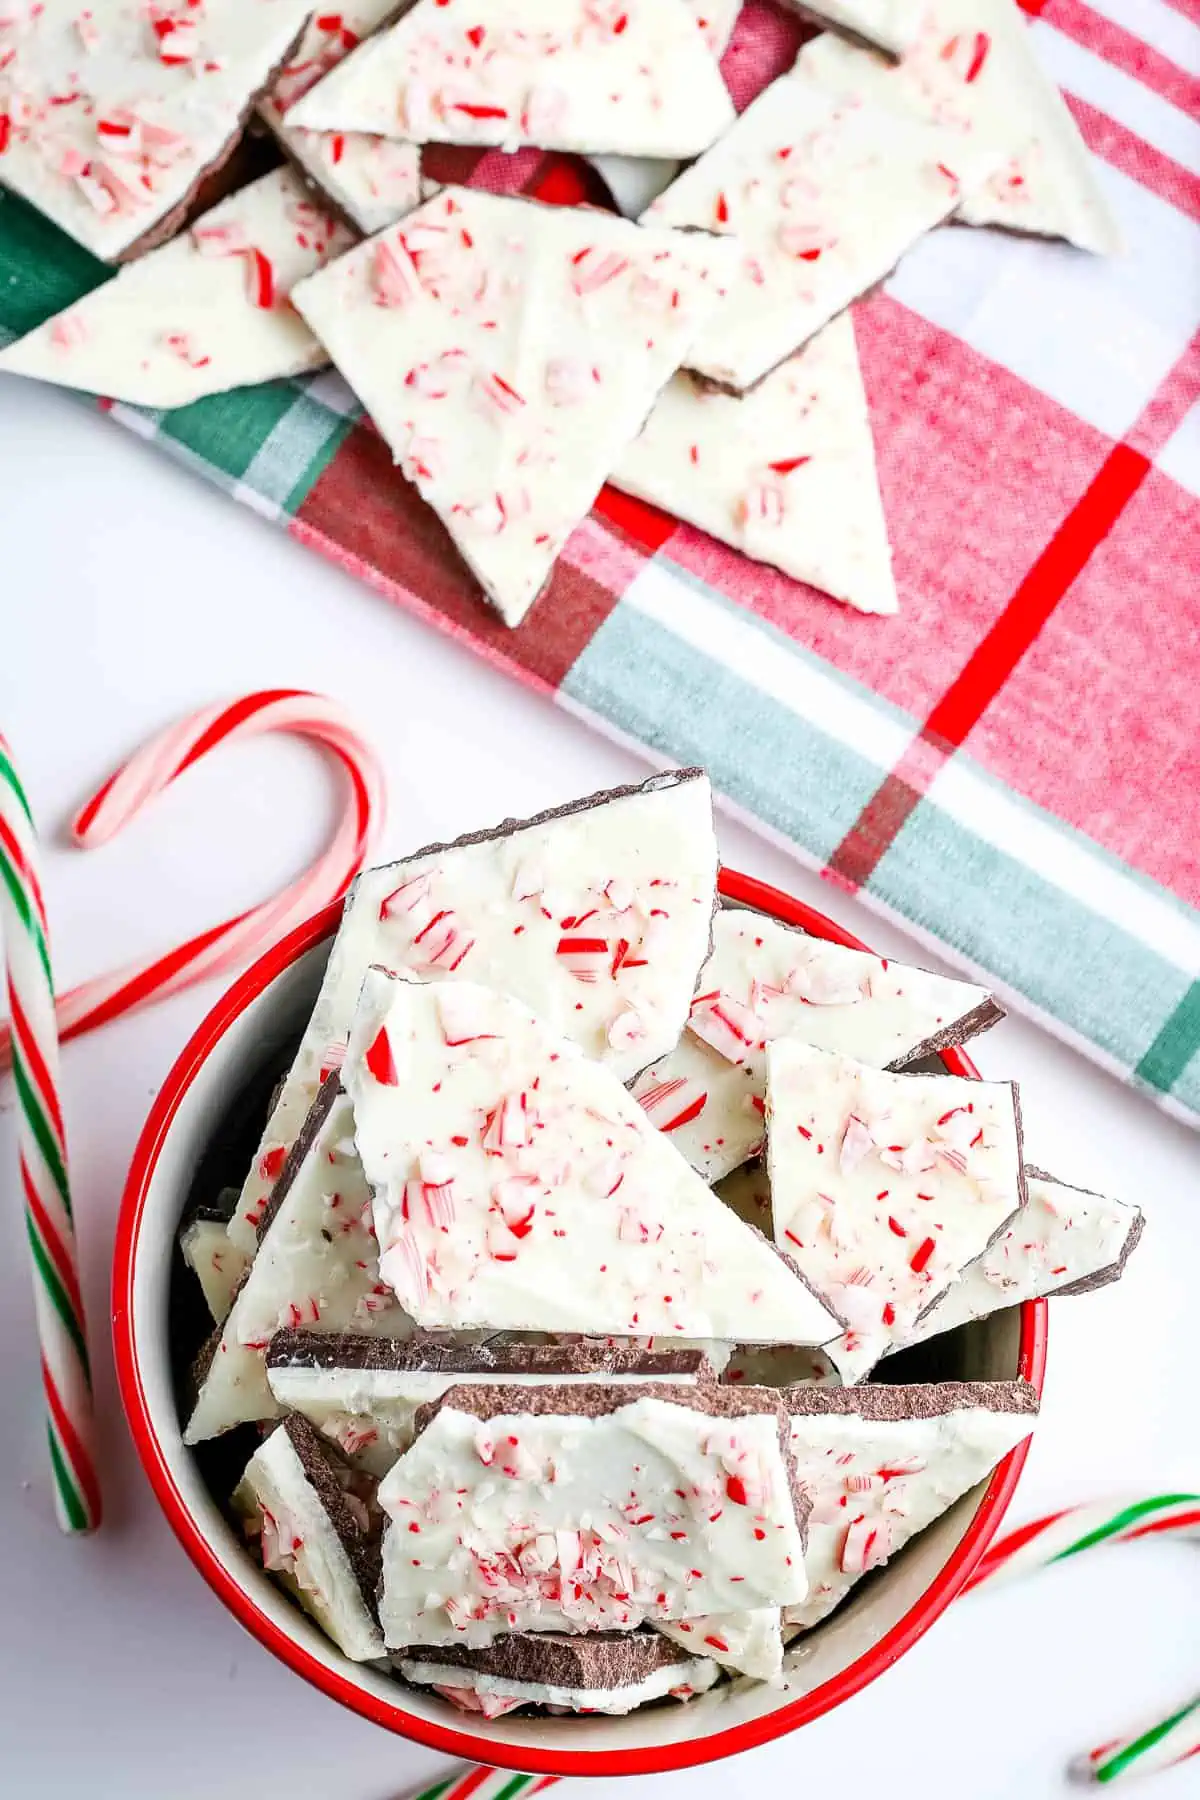 candy cane bark in red bowl and on Christmas plaid towel on white countertop with candy canes